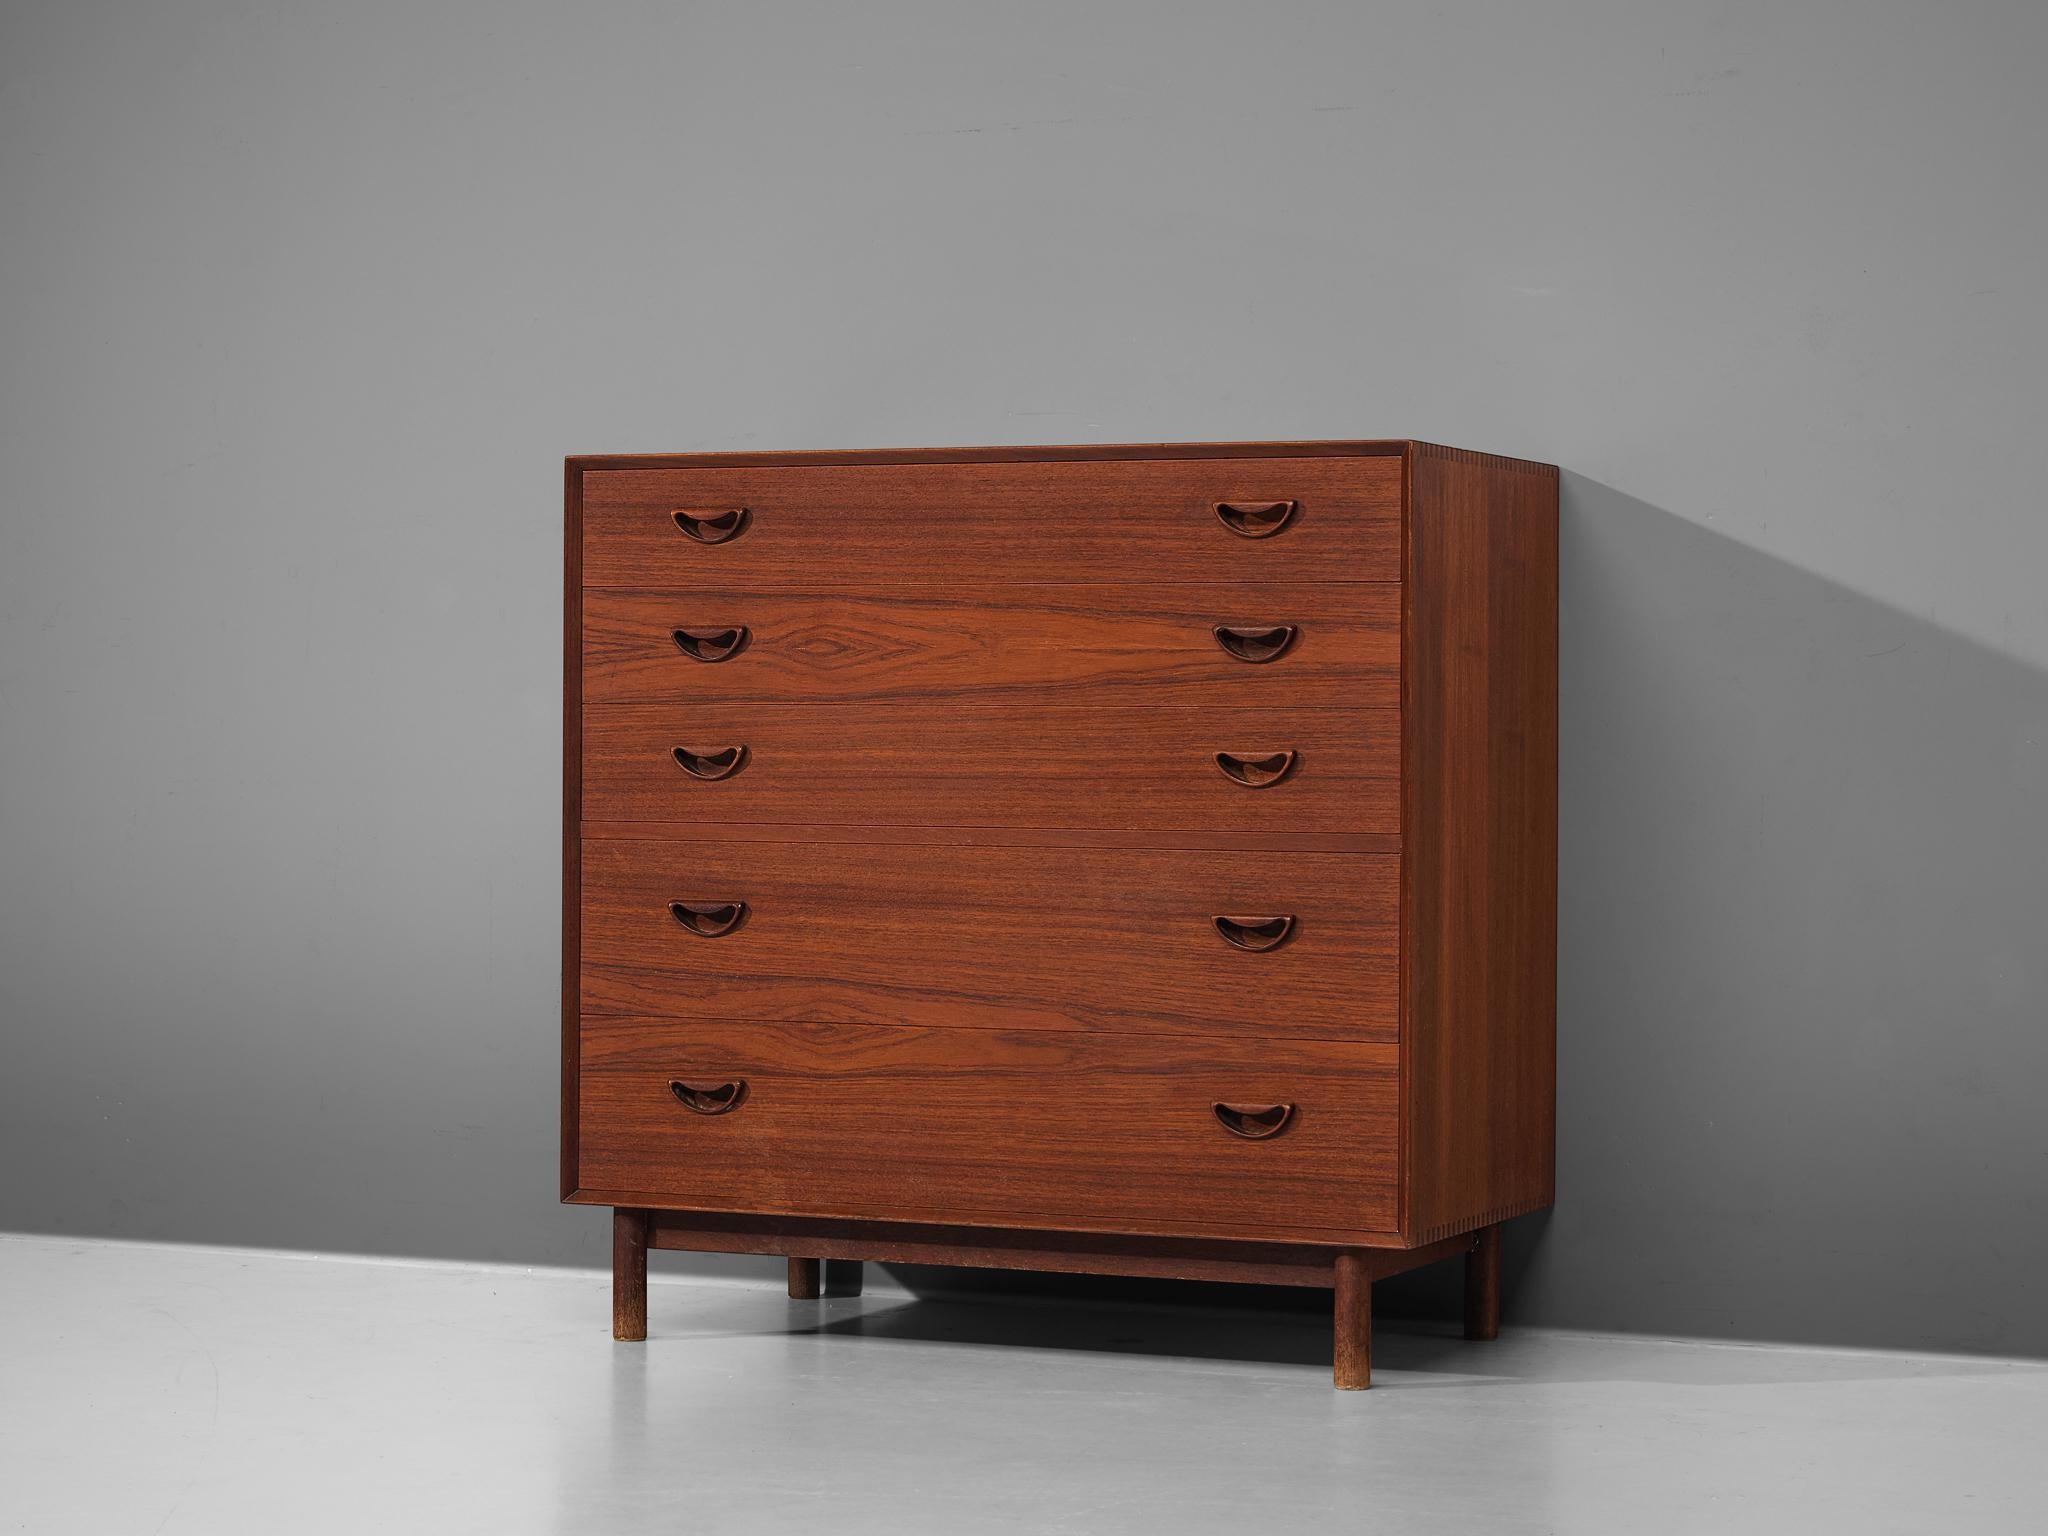 Peter Hvidt & Orla Mølgaard-Nielsen for Søborg Møbelfabrik, chest of drawers, teak, Denmark, 1950s.

This chest of drawers executed in solid teak is a design by the Danish designers Peter Hvidt and Orla Mølgaard-Nielsen. It convinces both visual and